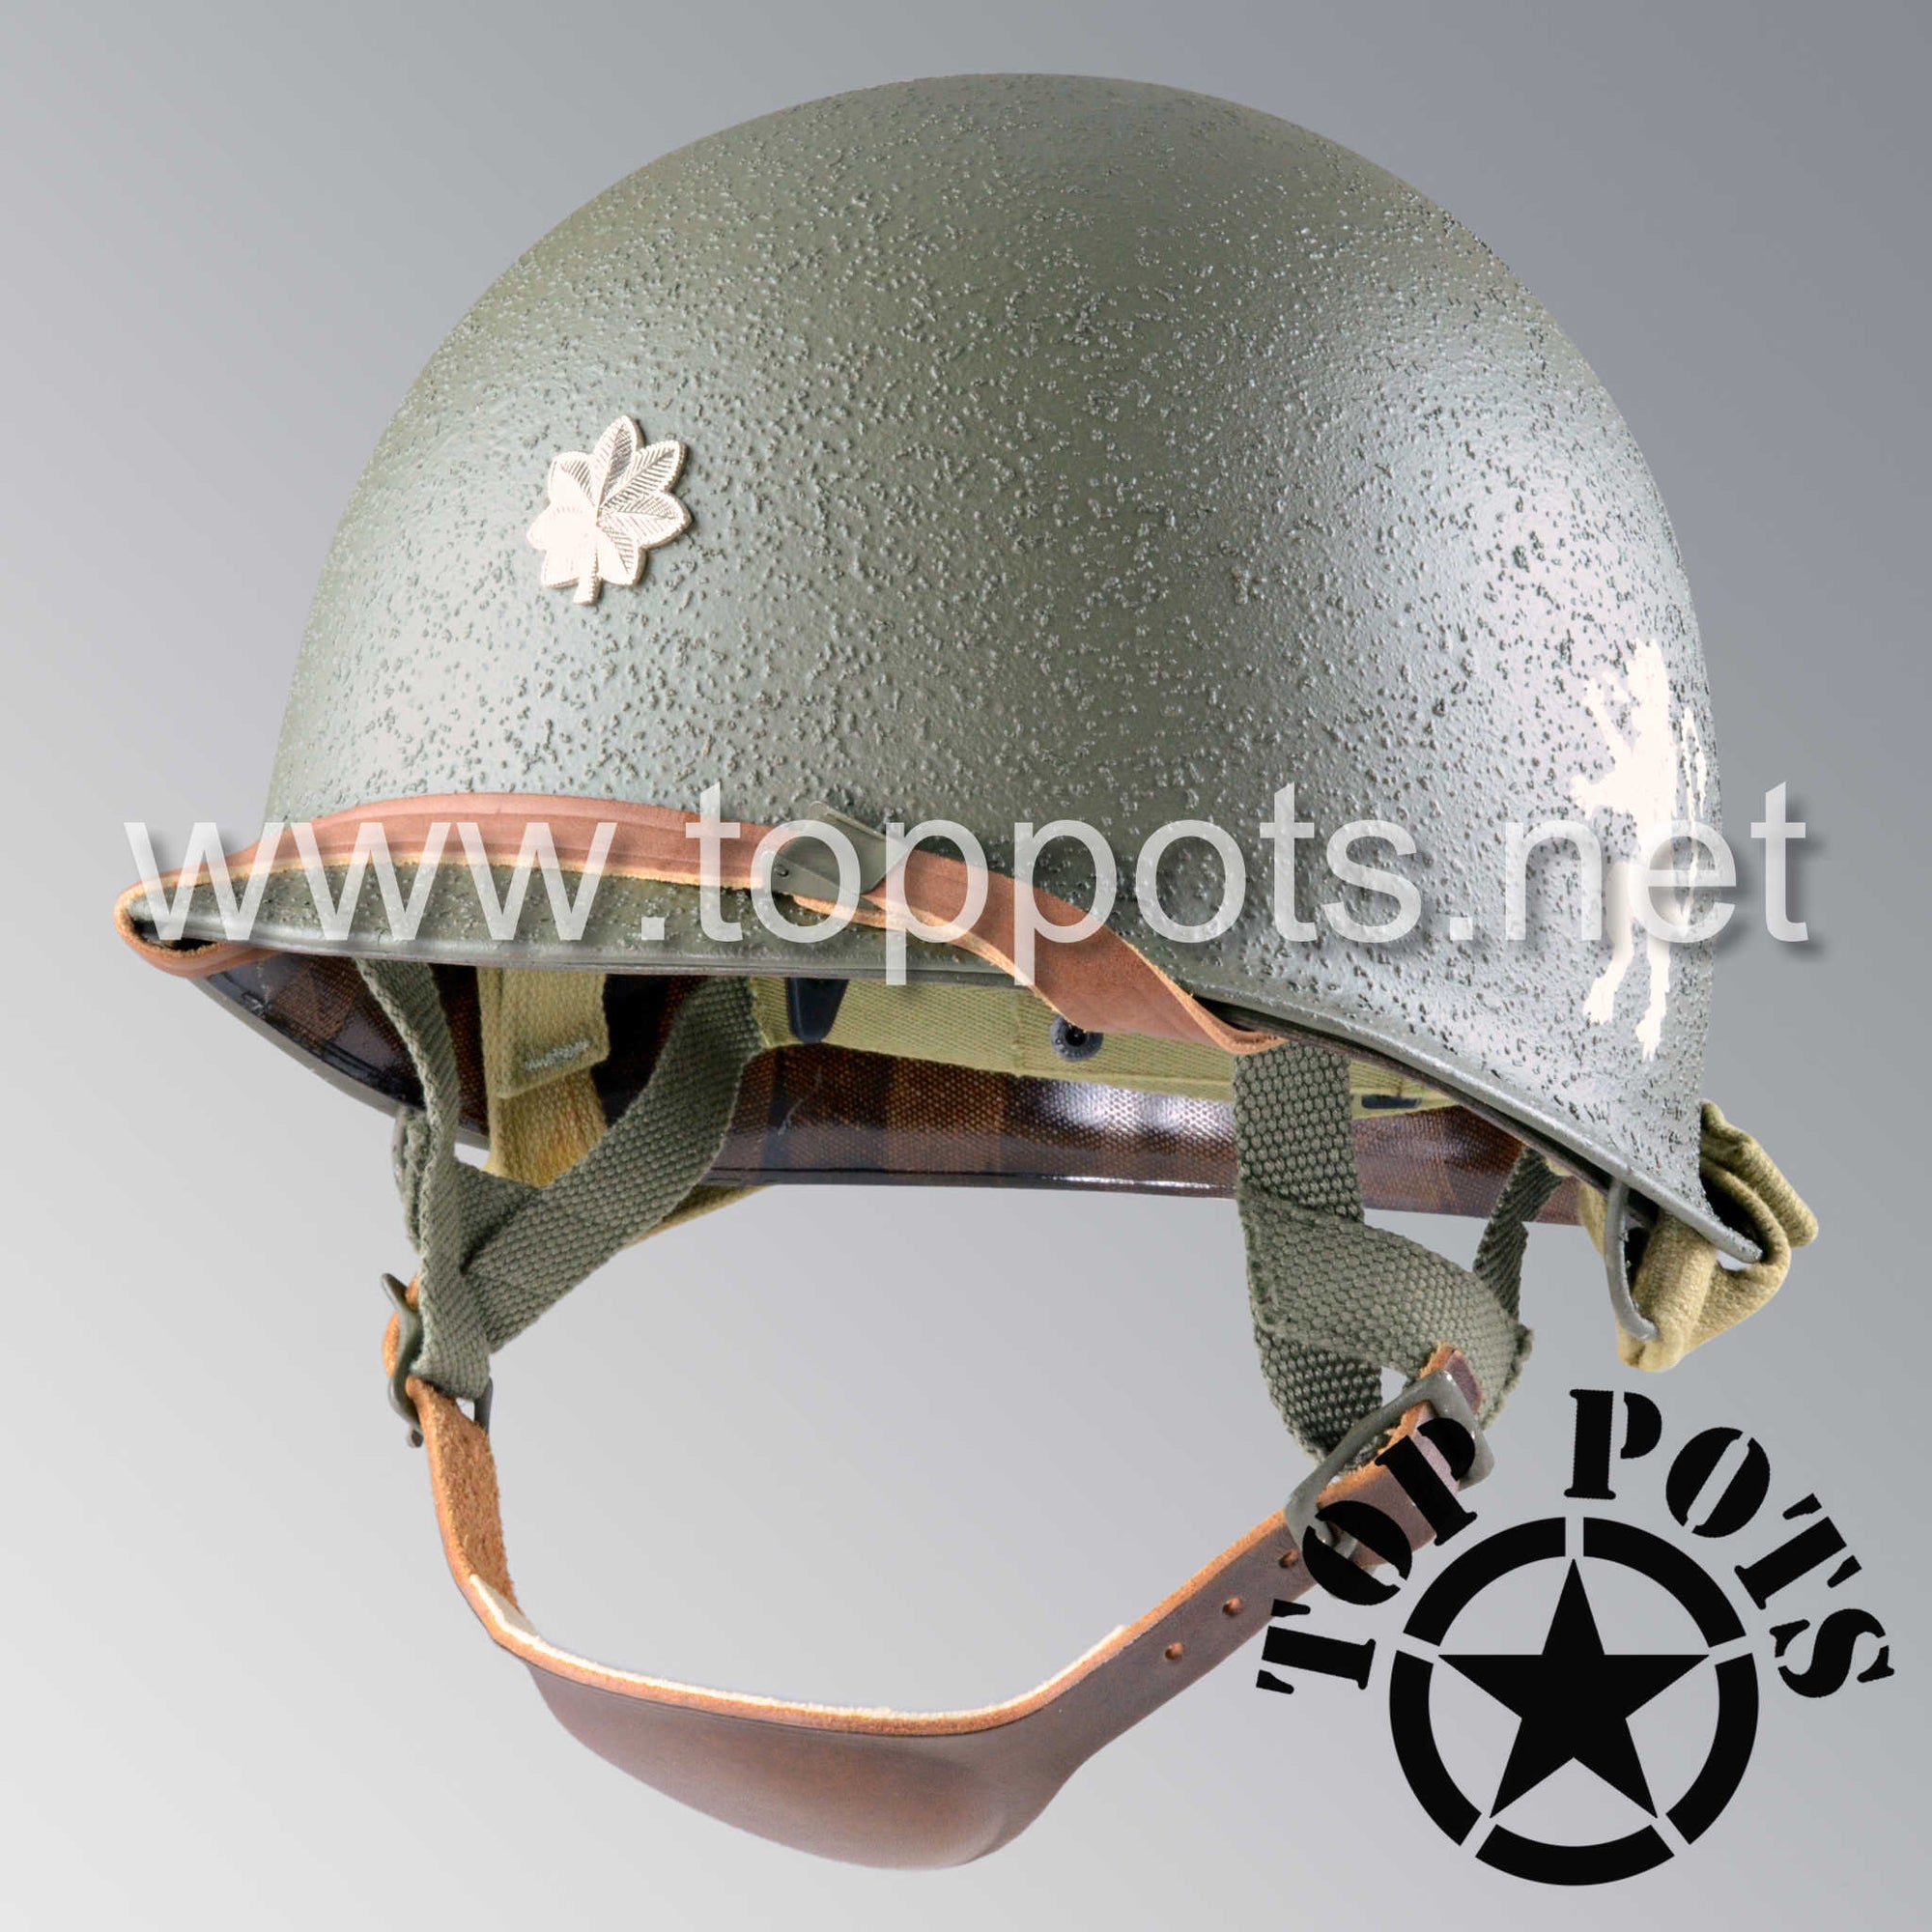 WWII US Army Restored Original M2 Paratrooper Airborne Helmet D Bale Shell and Liner with 505th PIR Major Metal Officer Emblem